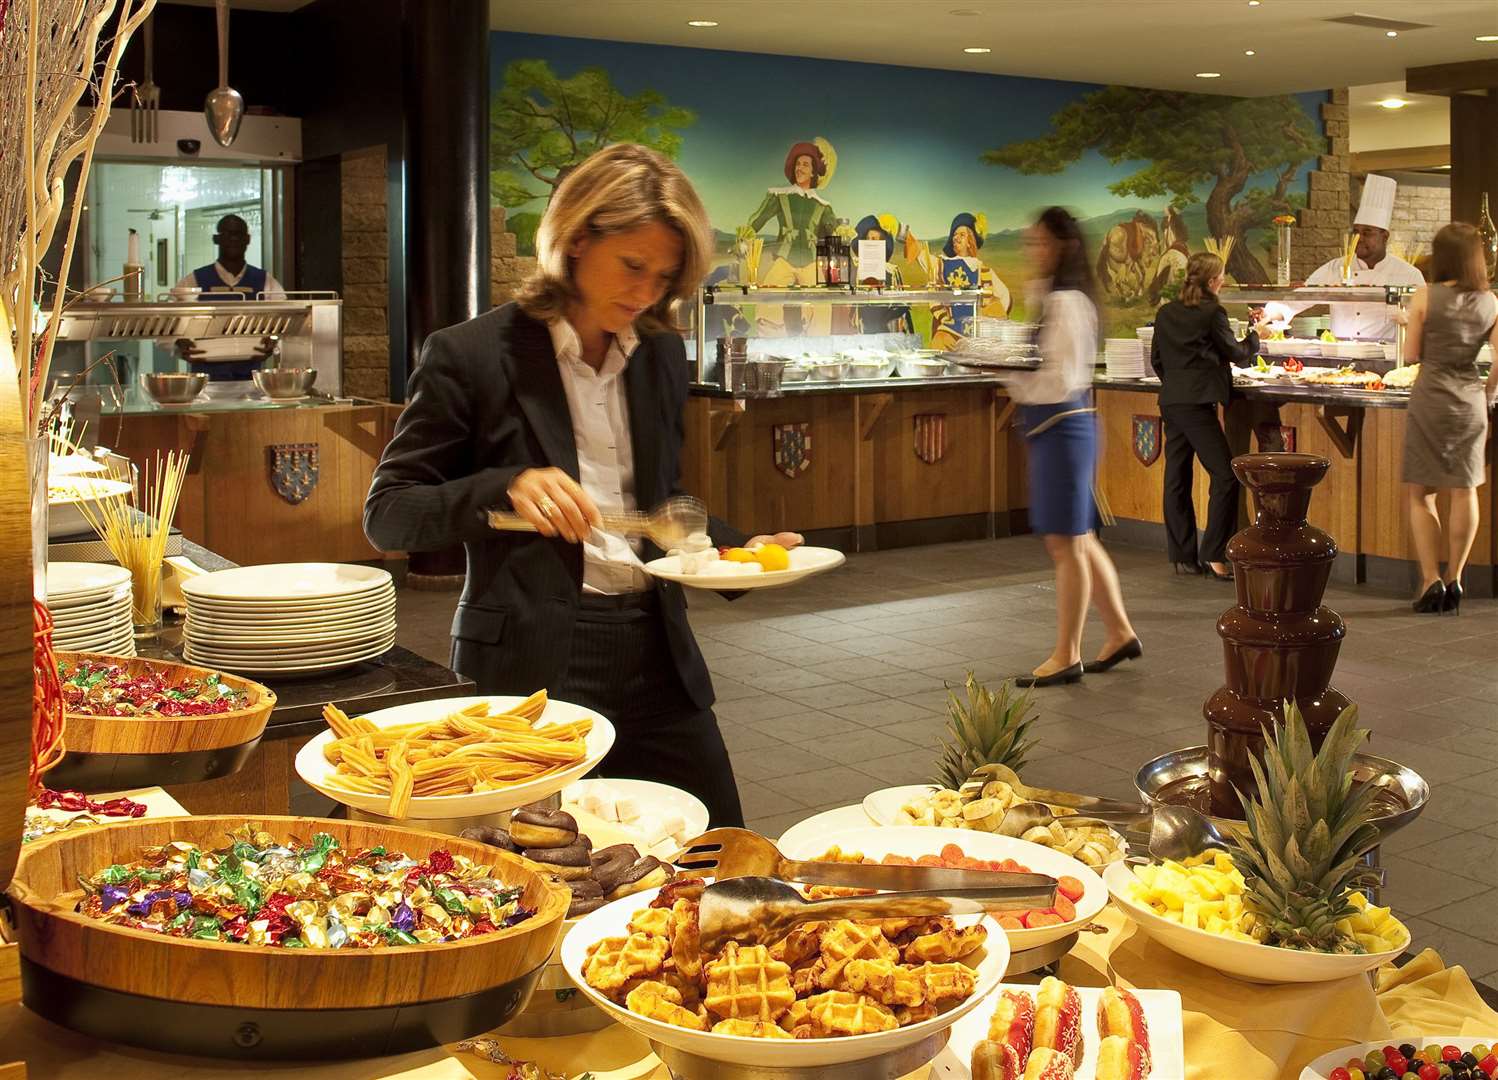 Buffet breakfasts at hotels could disappear for the foreseeable future